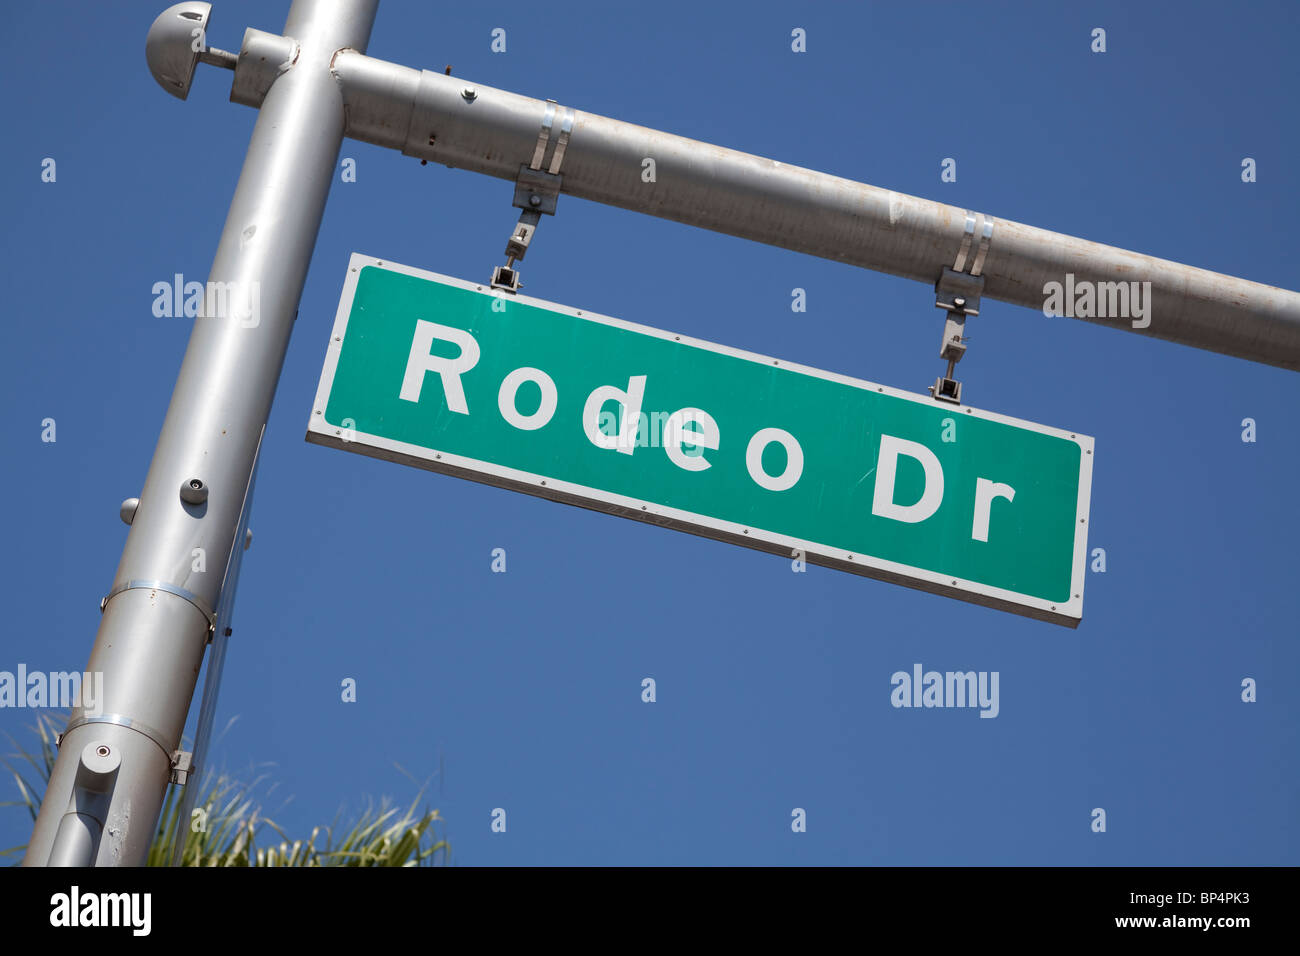 LOS ANGELES - Rodeo Drive, Beverly Hills Sign, Los Angeles, California,  USA, Travel, 4K UHD 